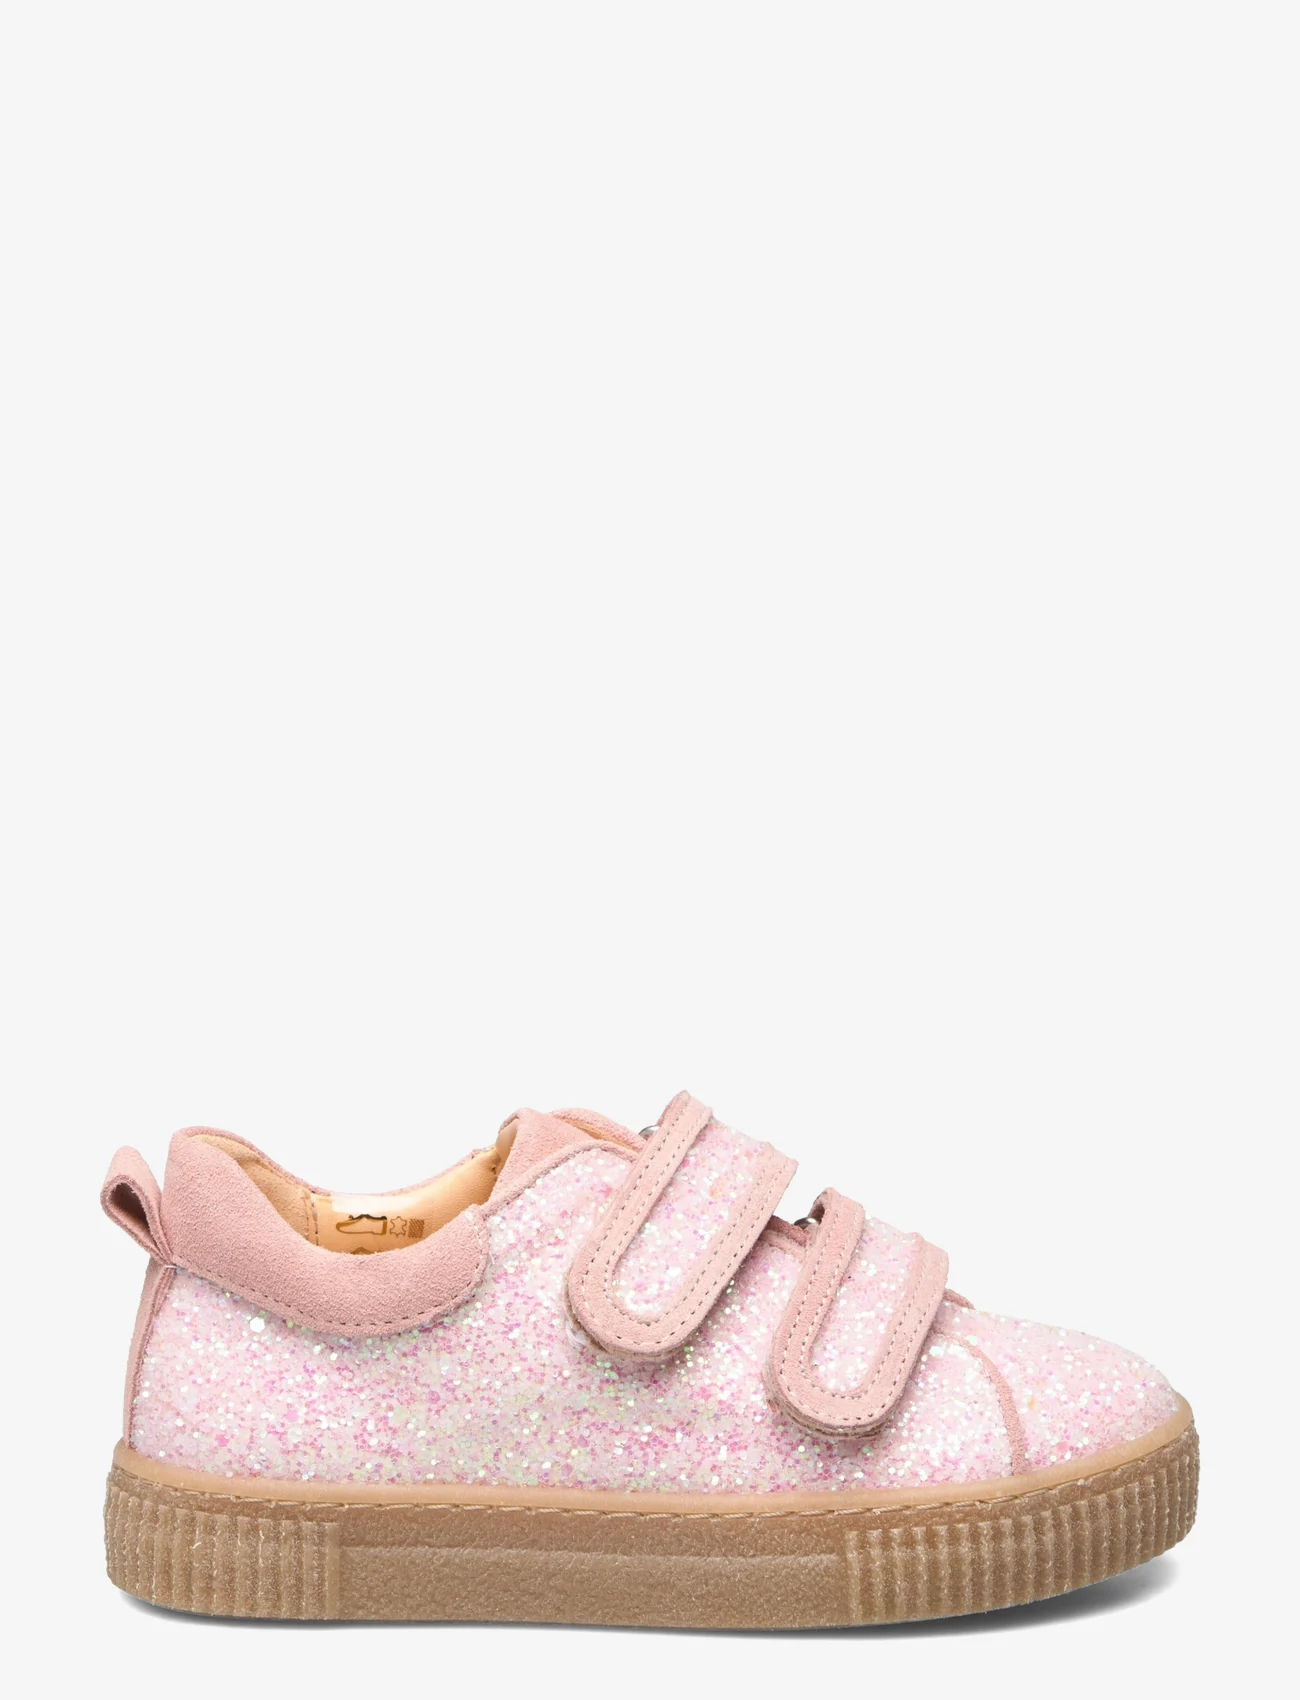 ANGULUS - Shoes - flat - with velcro - sommarfynd - 2698 rosa glitter/peach - 1